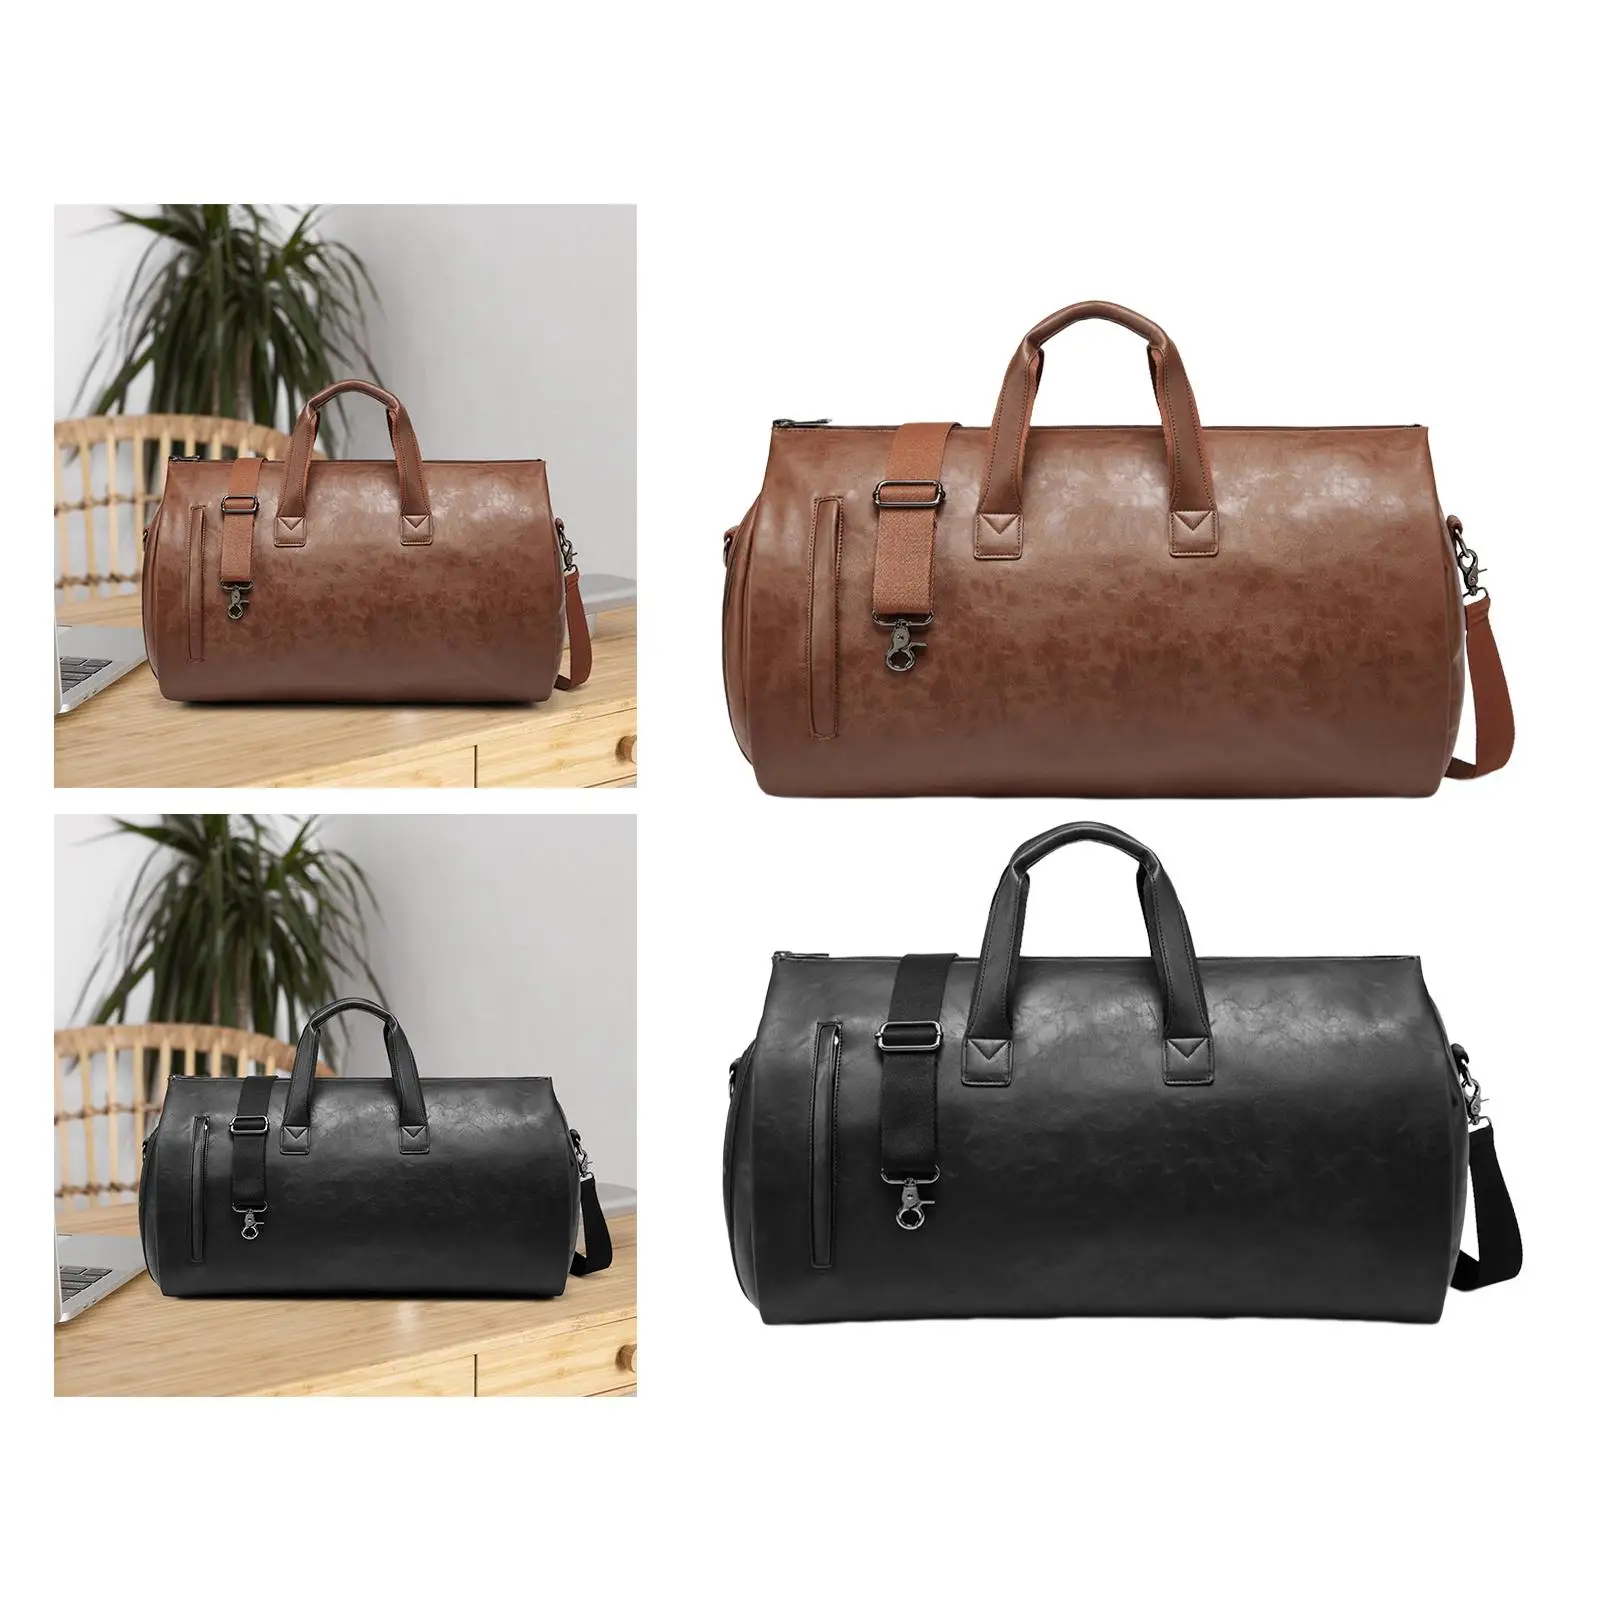 Leather Duffle Bag Water Resistant Carry on Bag Business Travel Bag for Men